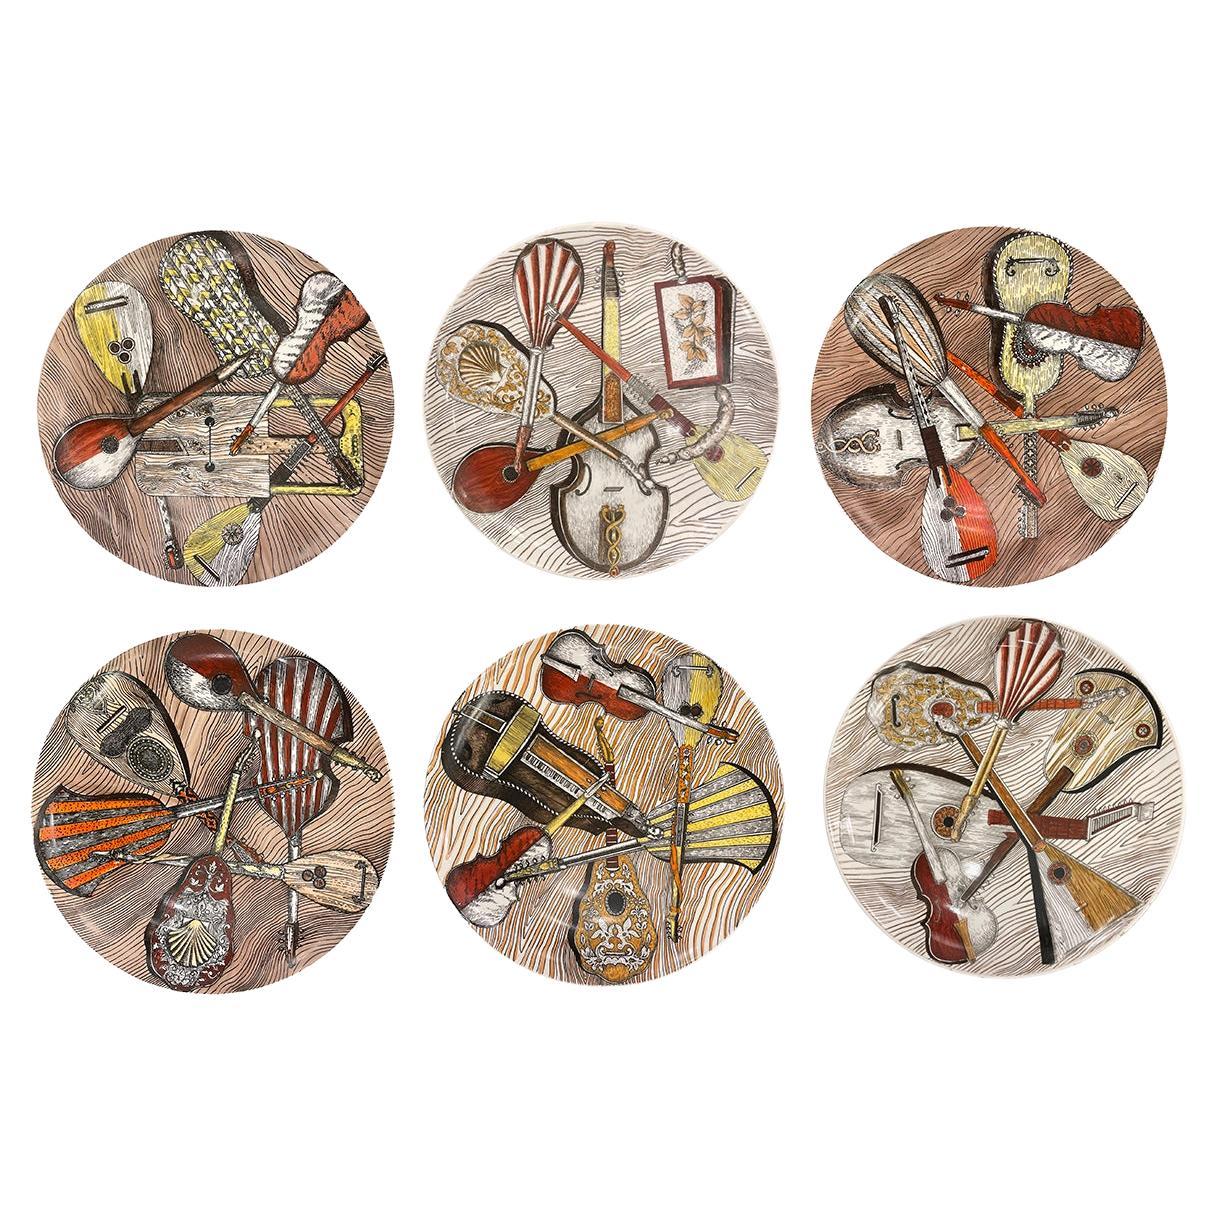 Vintage Piero Fornasetti Plates from the "Istrumenti Musicali" Series For Sale